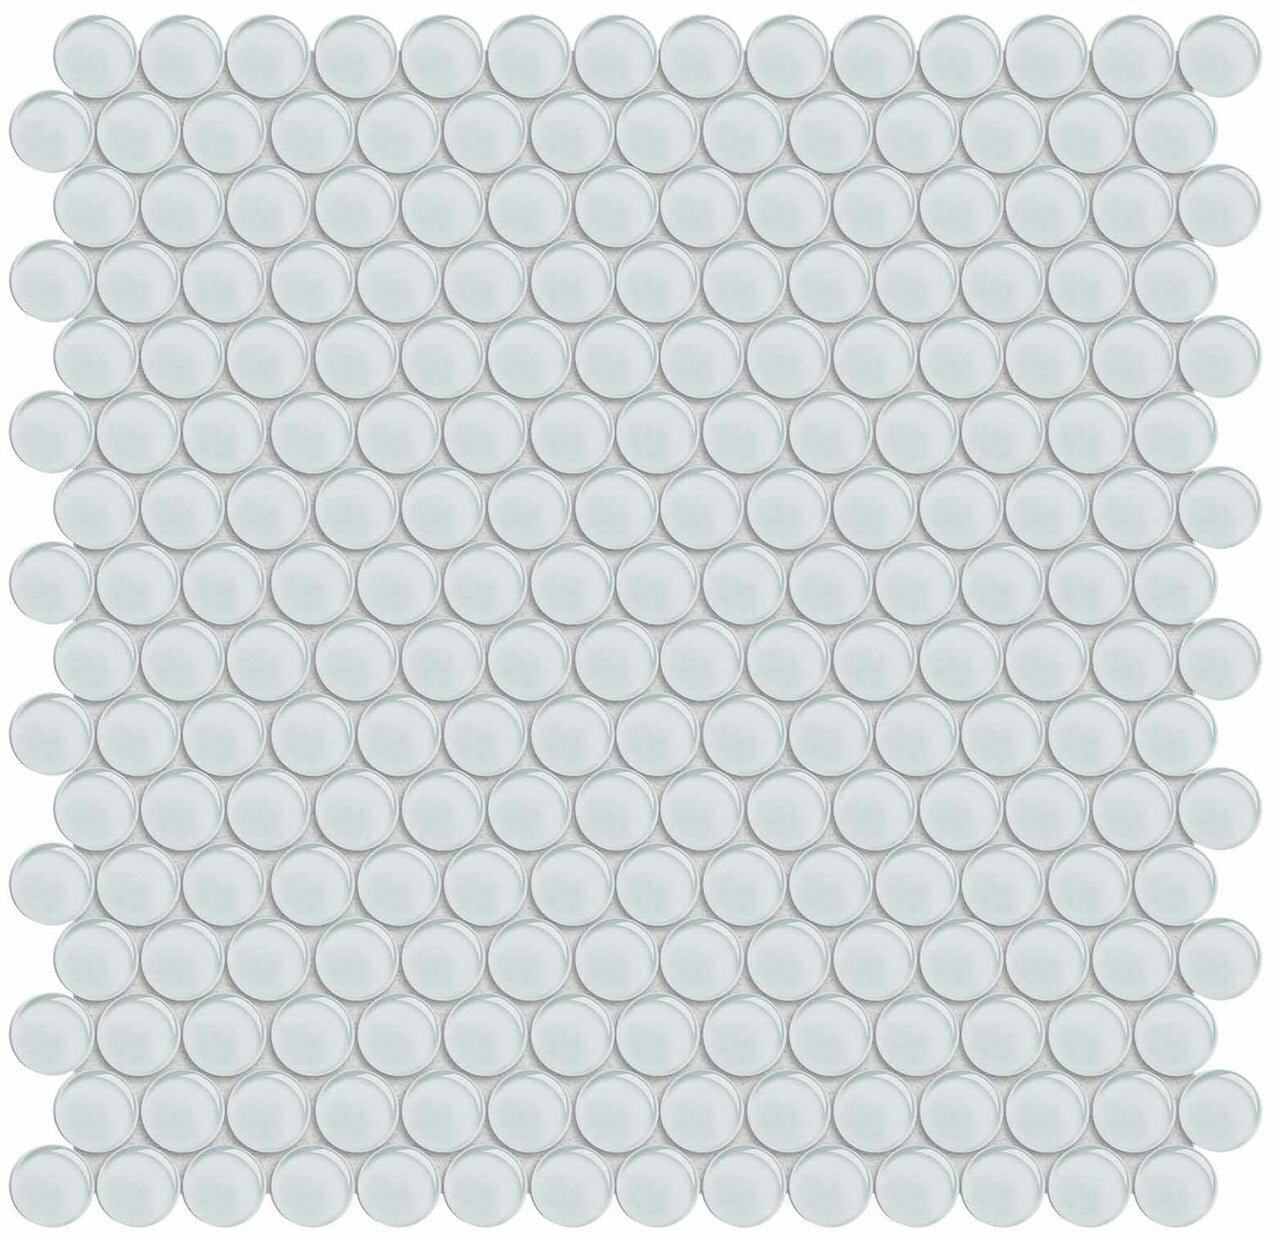 Element Ice Penny Round Glossy Glass Mosaic